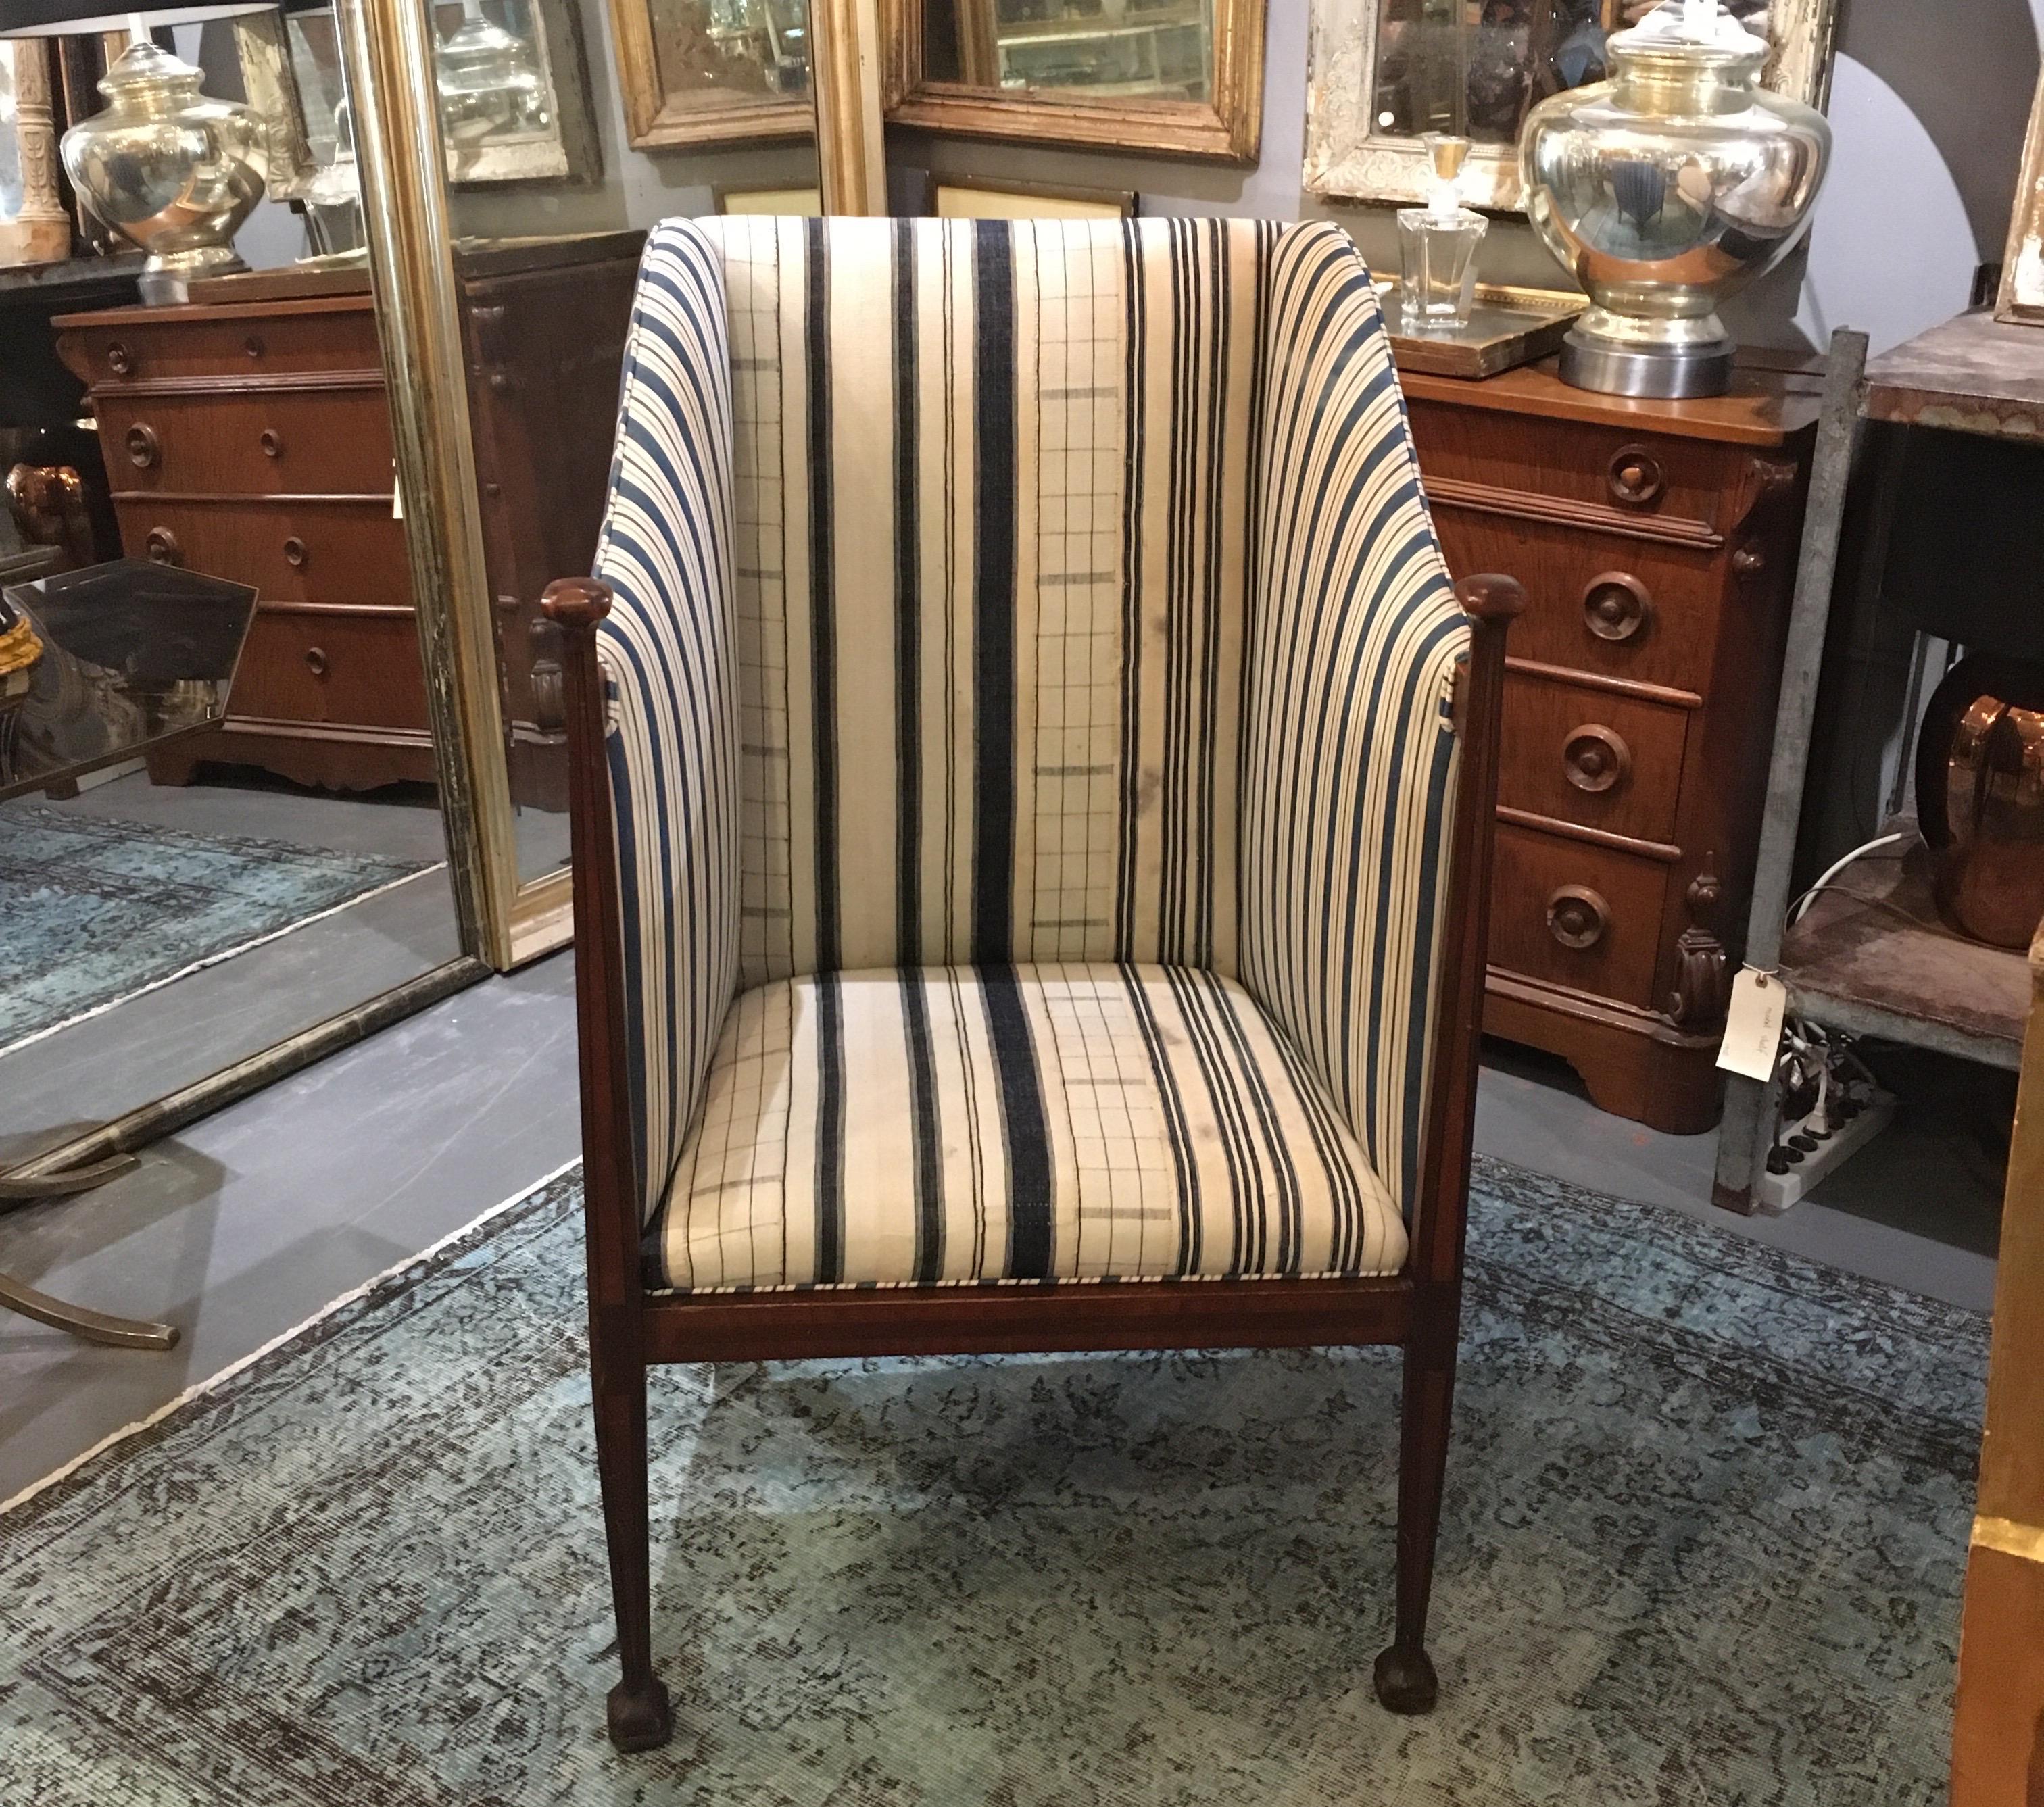 1910 very tall back Edwardian hall chair in blue and white 19th century linen homespun and early 20th century striped cotton ticking. Inlaid wood down front of chair, with carved wood caps and legs.
 